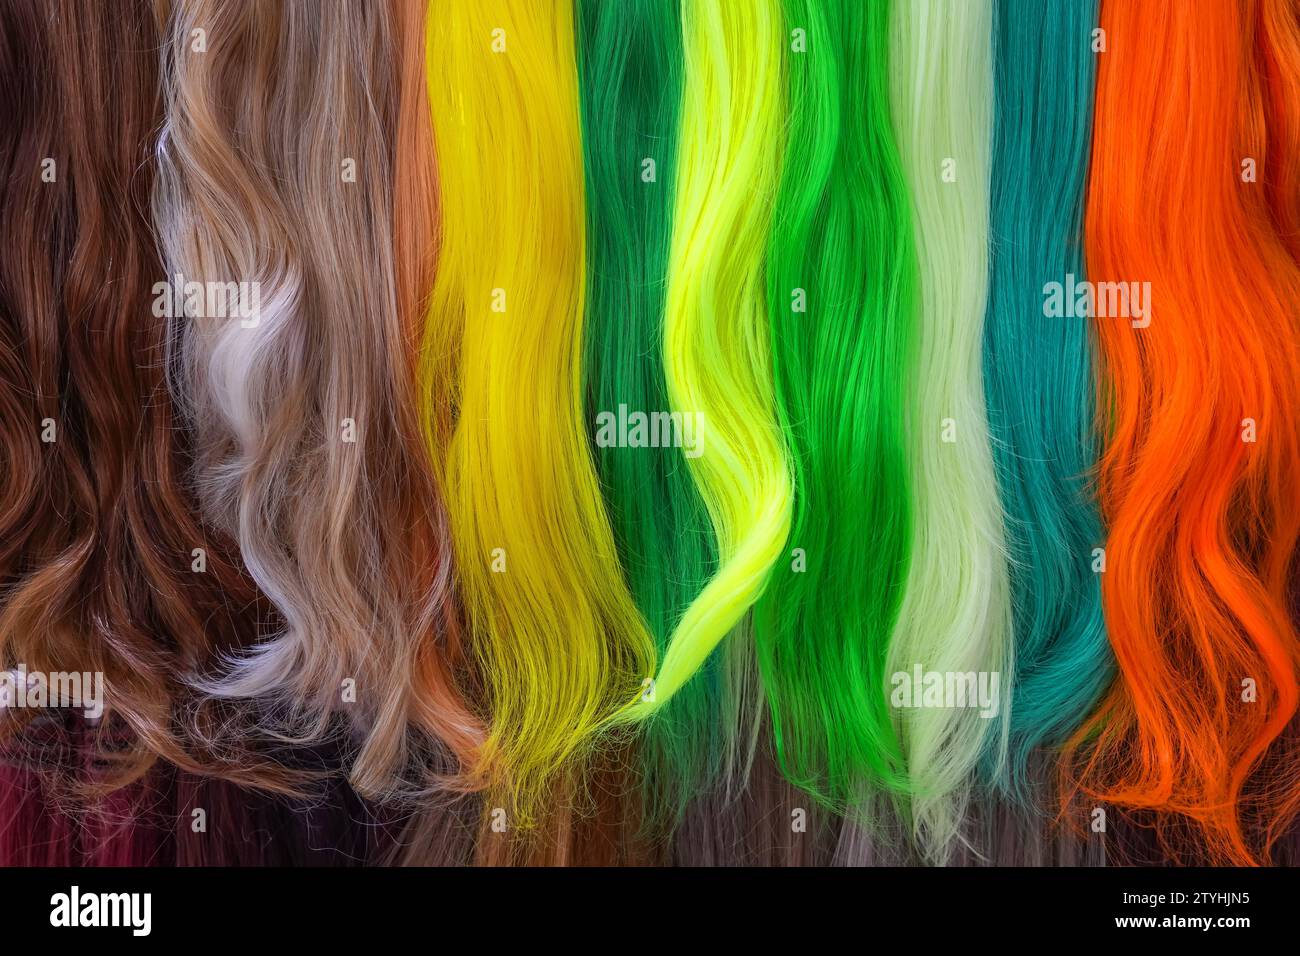 Hair samples of different colors palette. Different hair bright rich tint colors - yellow, green, crimson, orange. Various hair colors set background Stock Photo